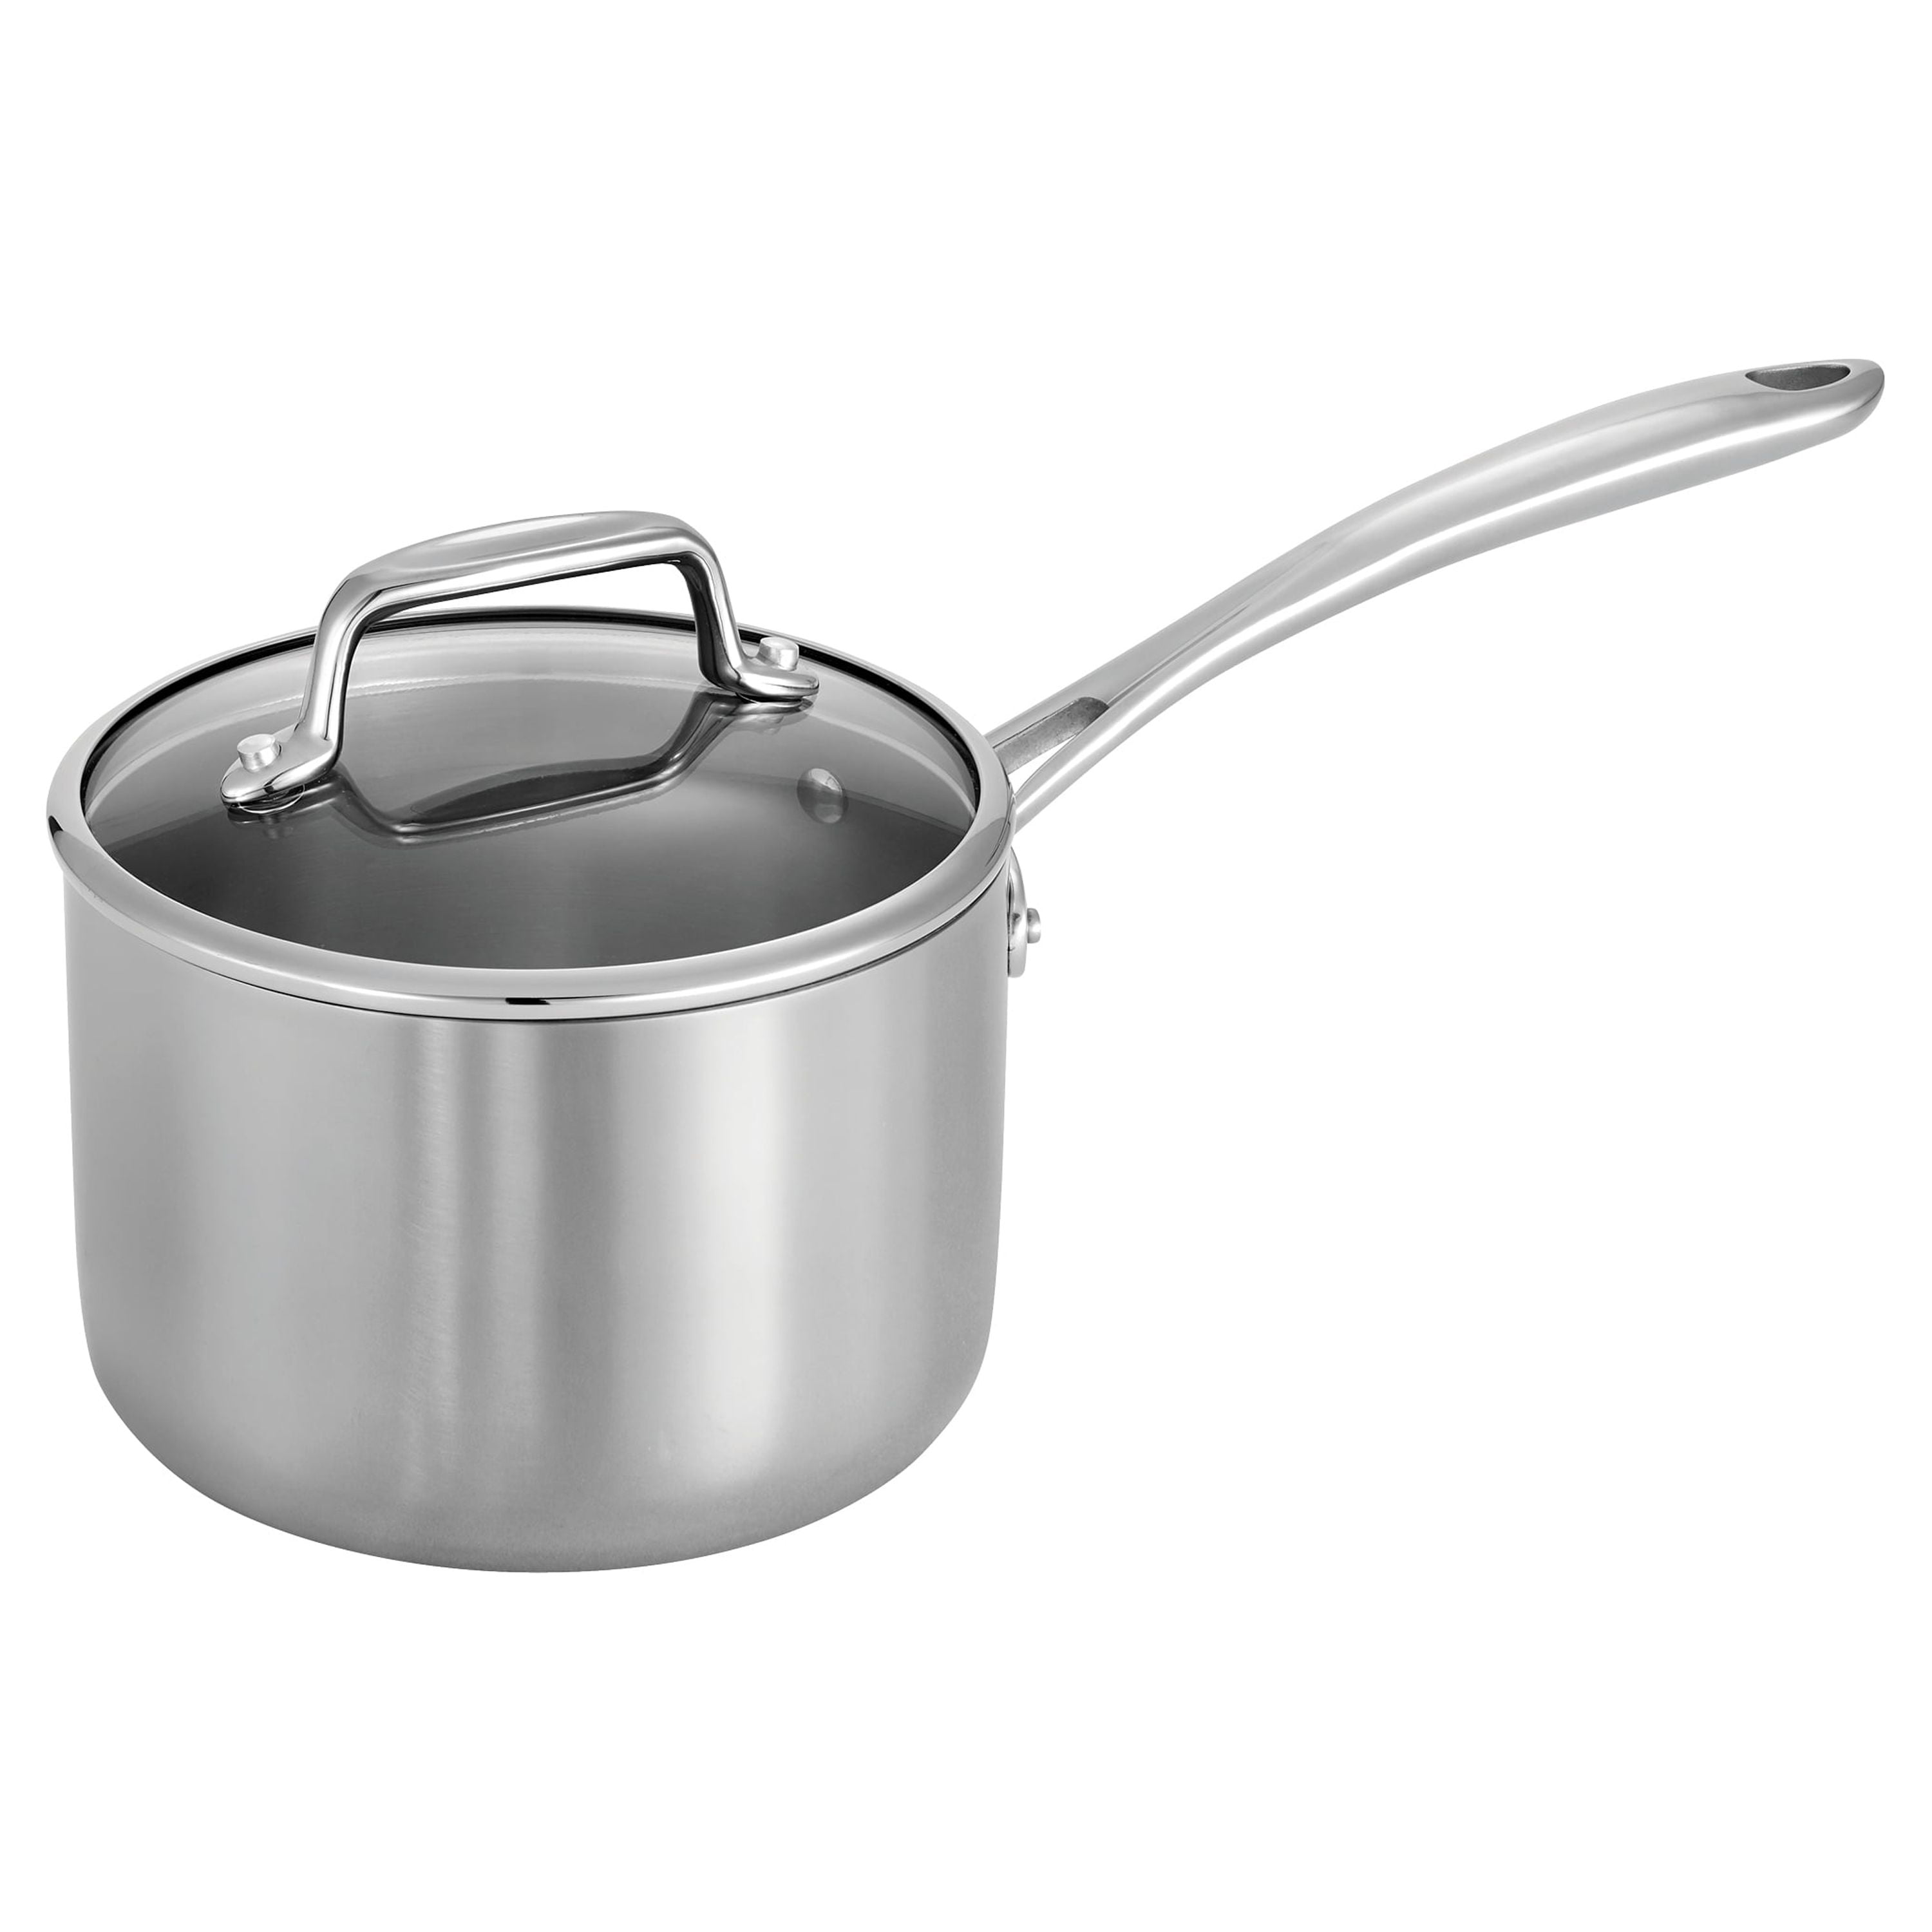 TPFAMELI Stainless Steel Saucepan with Lids 2 Quart Tri-Ply Layer Thickened  Bottom Sauce Pan Sauce Pot,Dishwasher Safe & Oven Safe